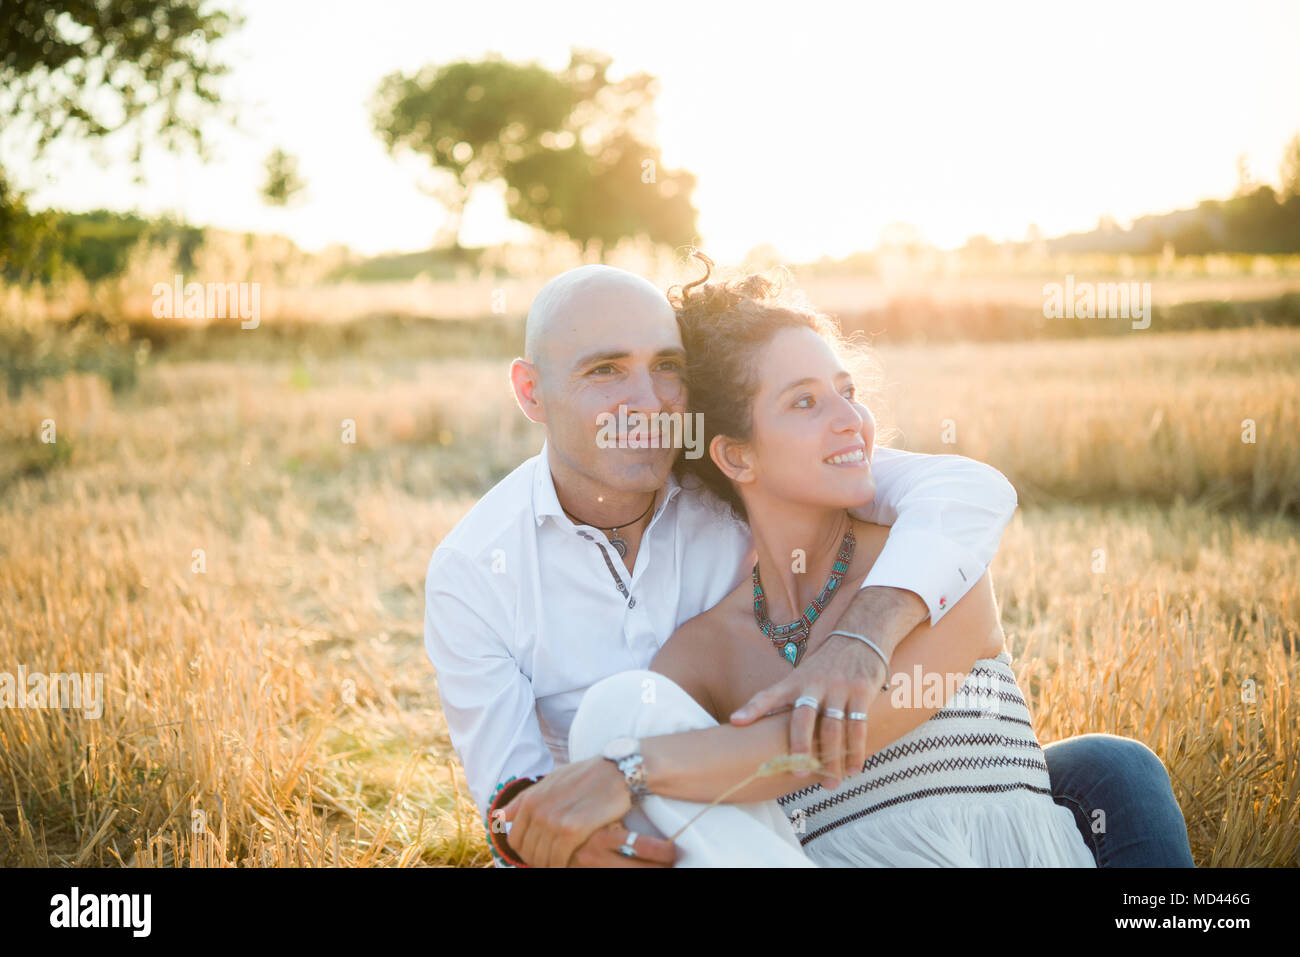 Couple sitting in field, hugging Banque D'Images